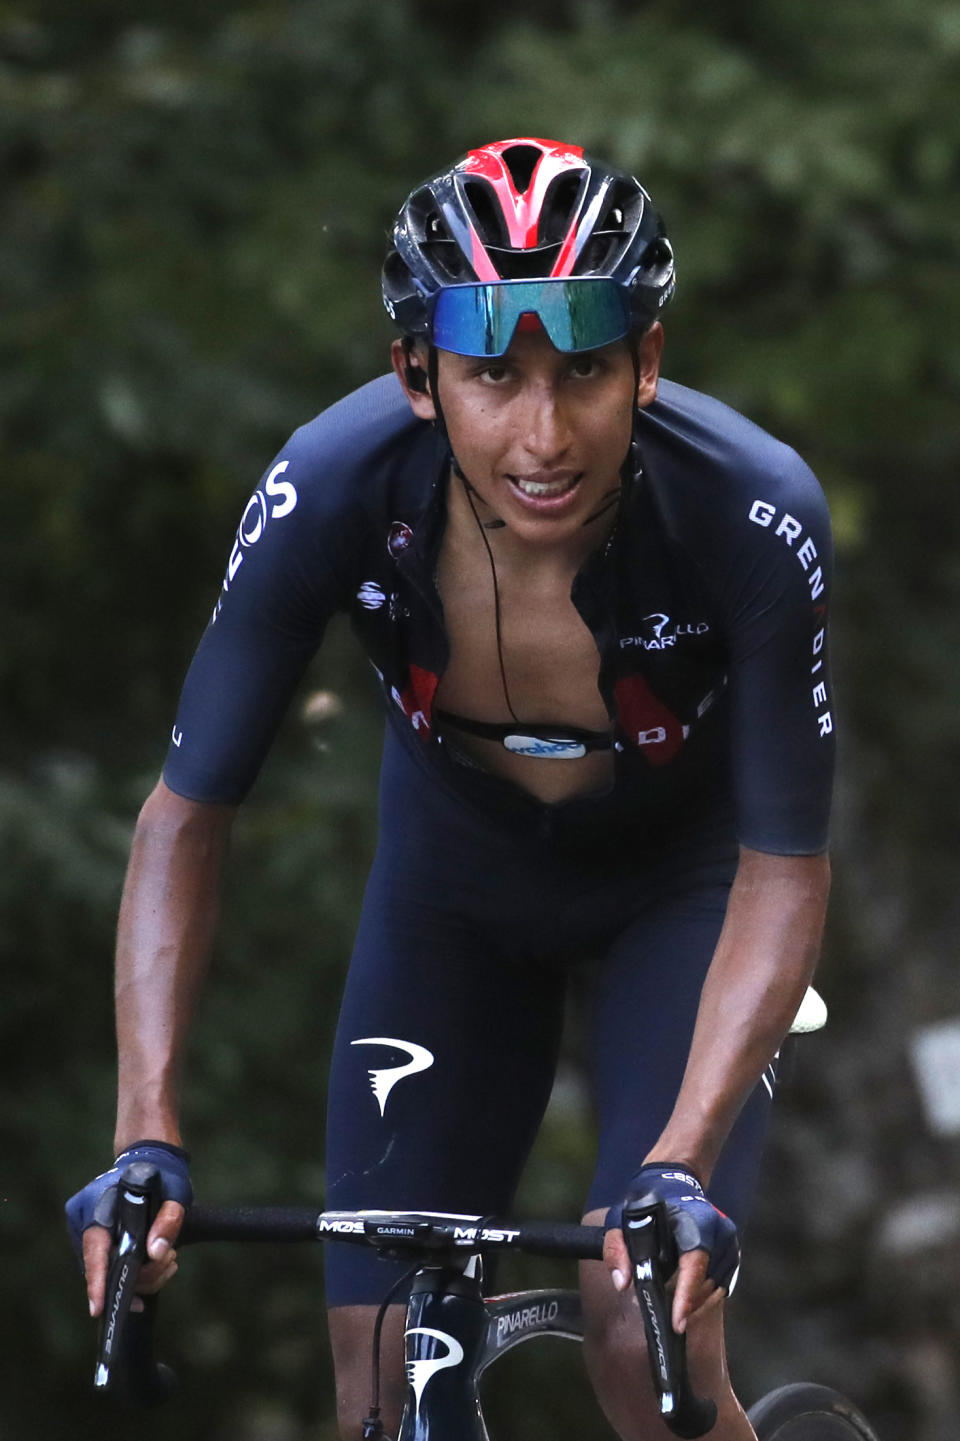 Colombia's Egan Bernal climbs Grand Colombier during the stage 15 of the Tour de France cycling race over 174 kilometers (108 miles), with start in Lyon and finish in Grand Colombier, Sunday, Sept. 13, 2020. (AP Photo/Christophe Ena)